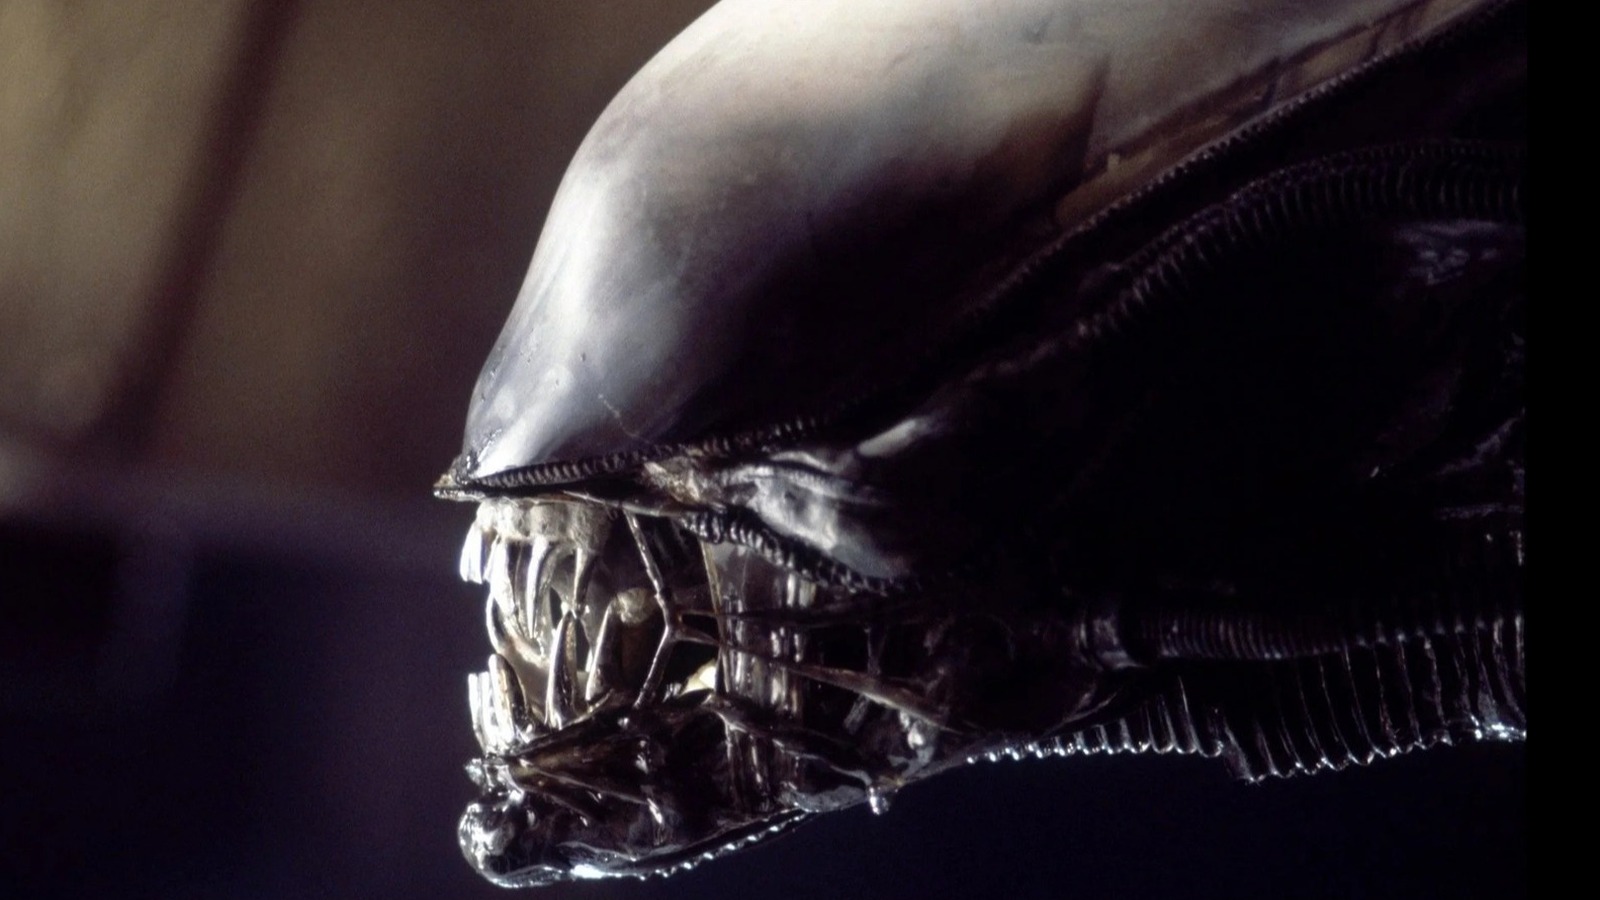 The Only Major Actors Still Alive From 1979’s Alien